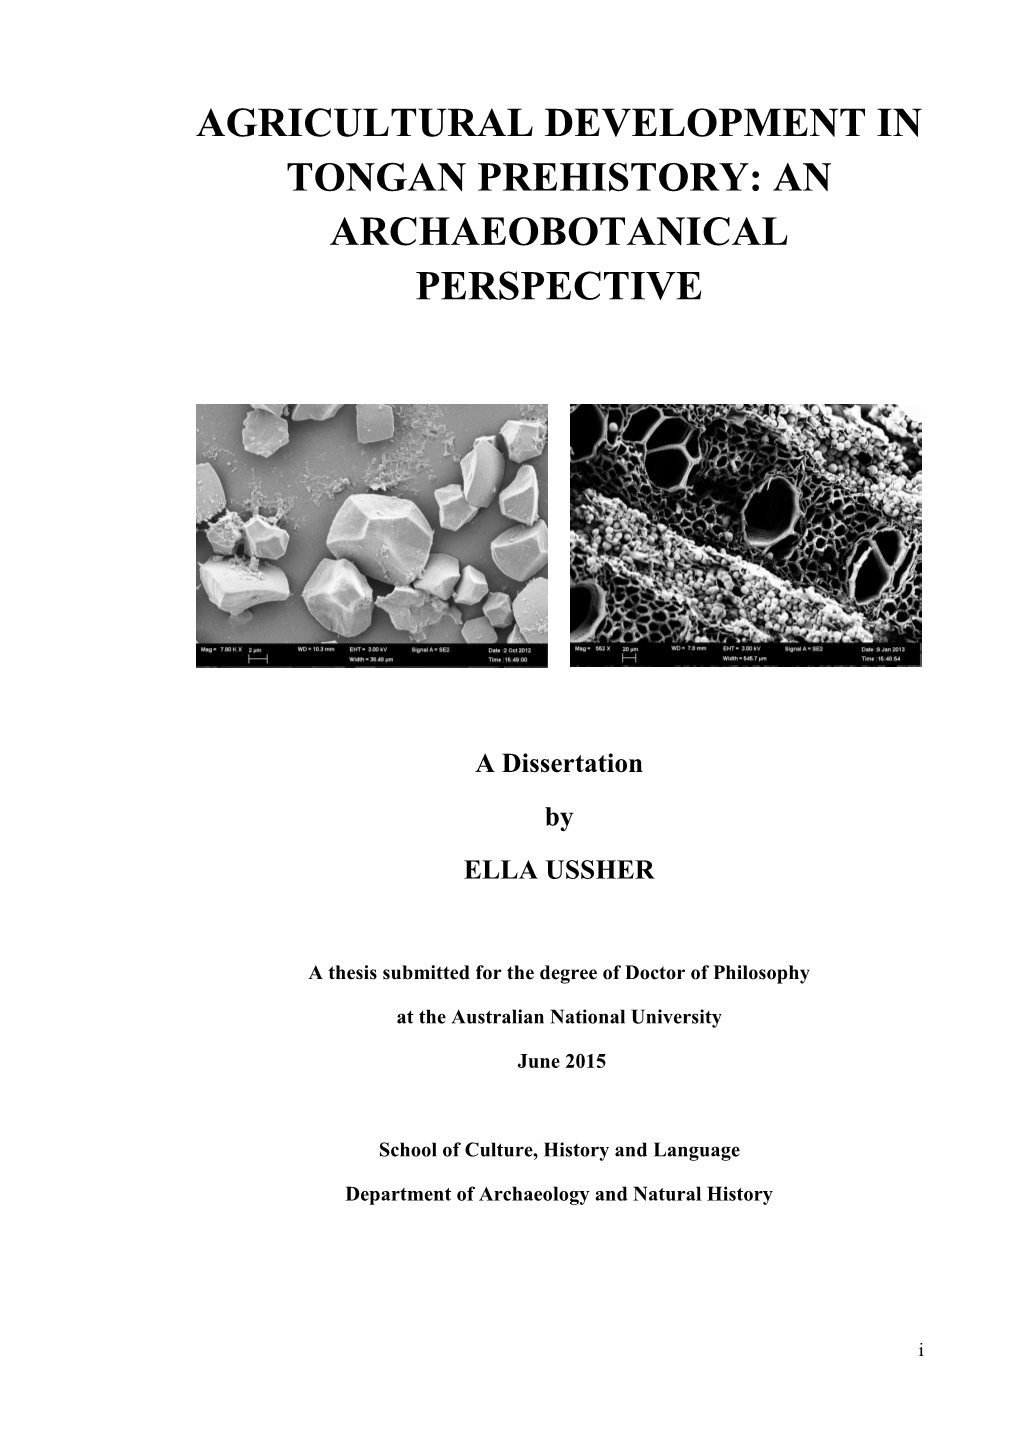 Agricultural Development in Tongan Prehistory: an Archaeobotanical Perspective